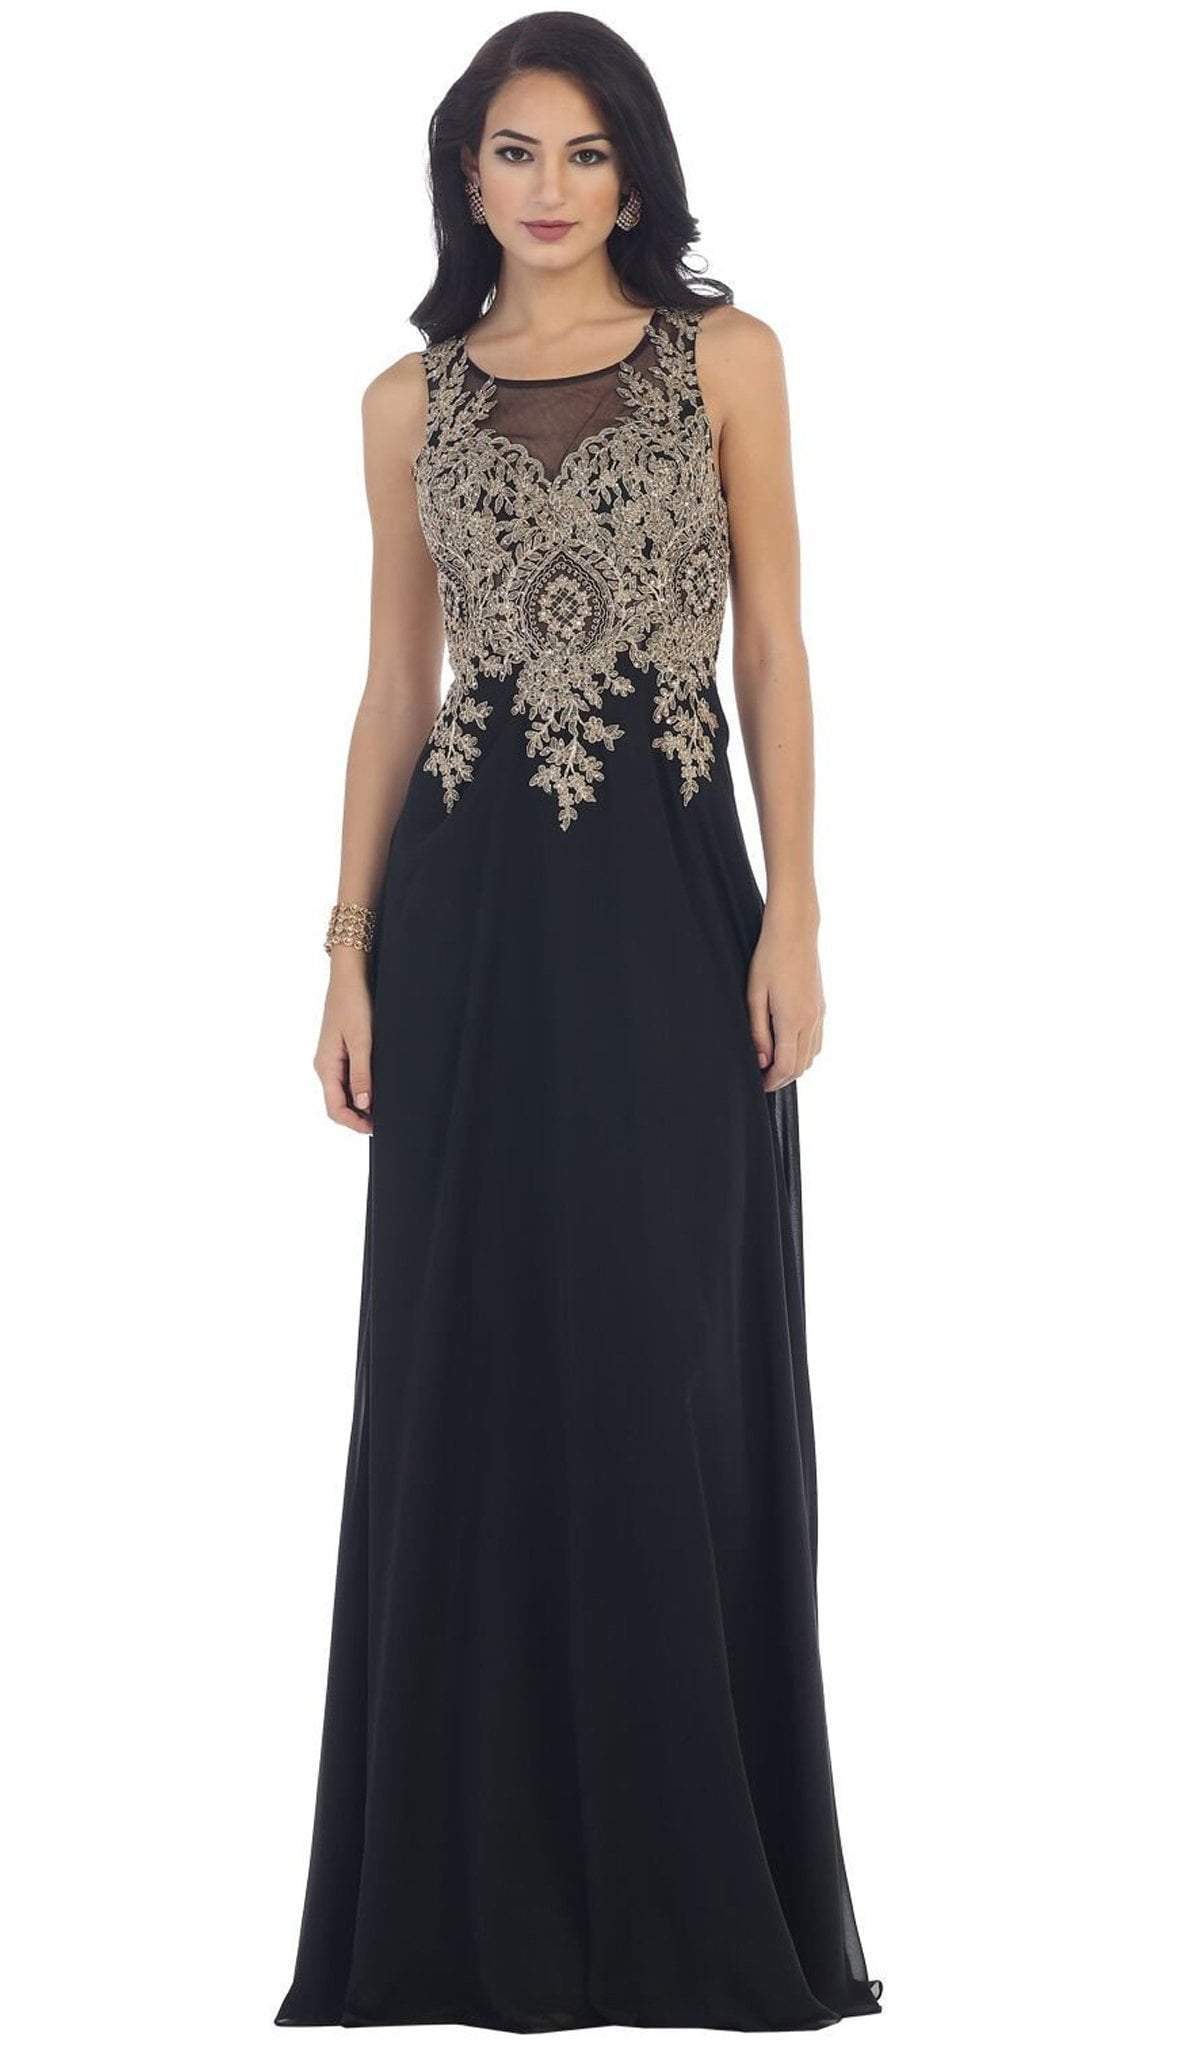 May Queen - MQ1432B Embellished Illusion Scoop A-line Prom Dress